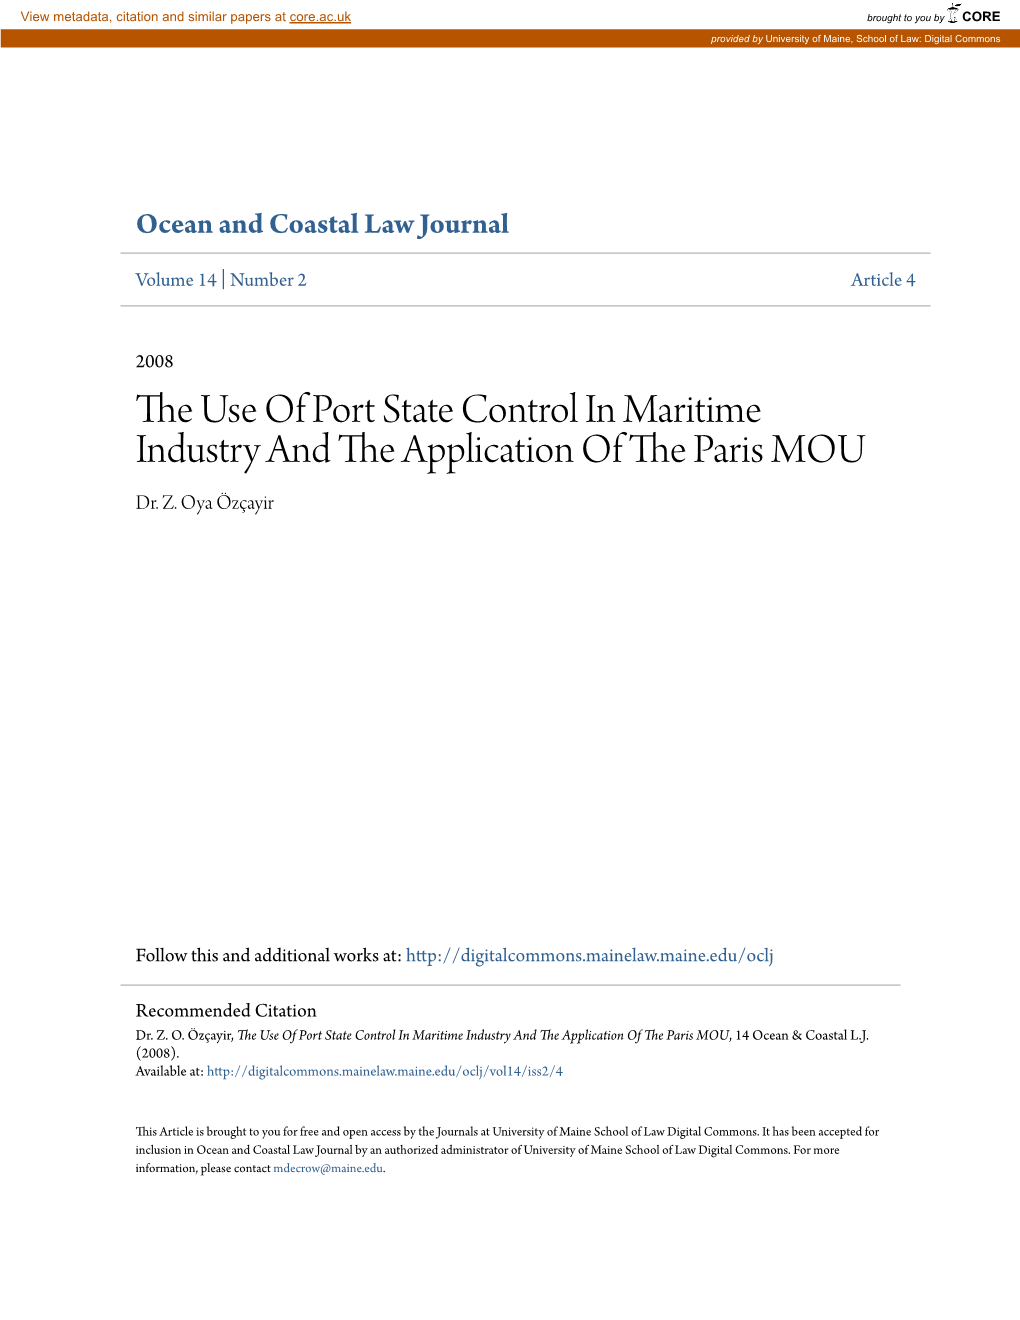 The Use of Port State Control in Maritime Industry and the Application of the Paris MOU, 14 Ocean & Coastal L.J